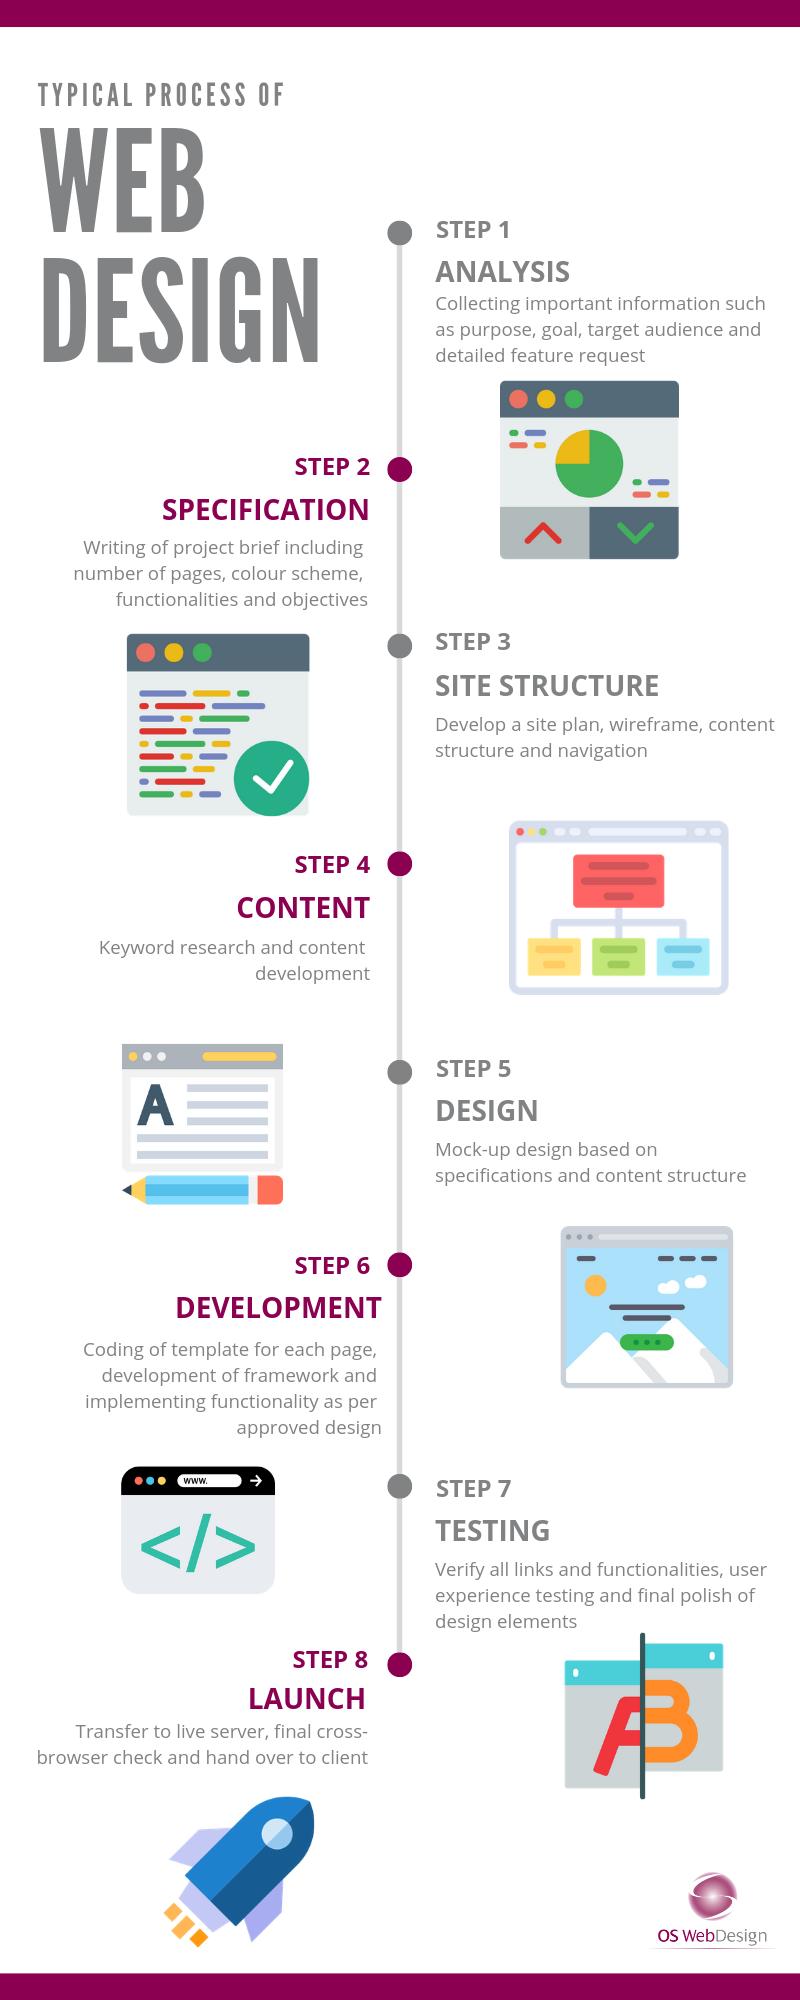 A typical web design process by OS WebDesign